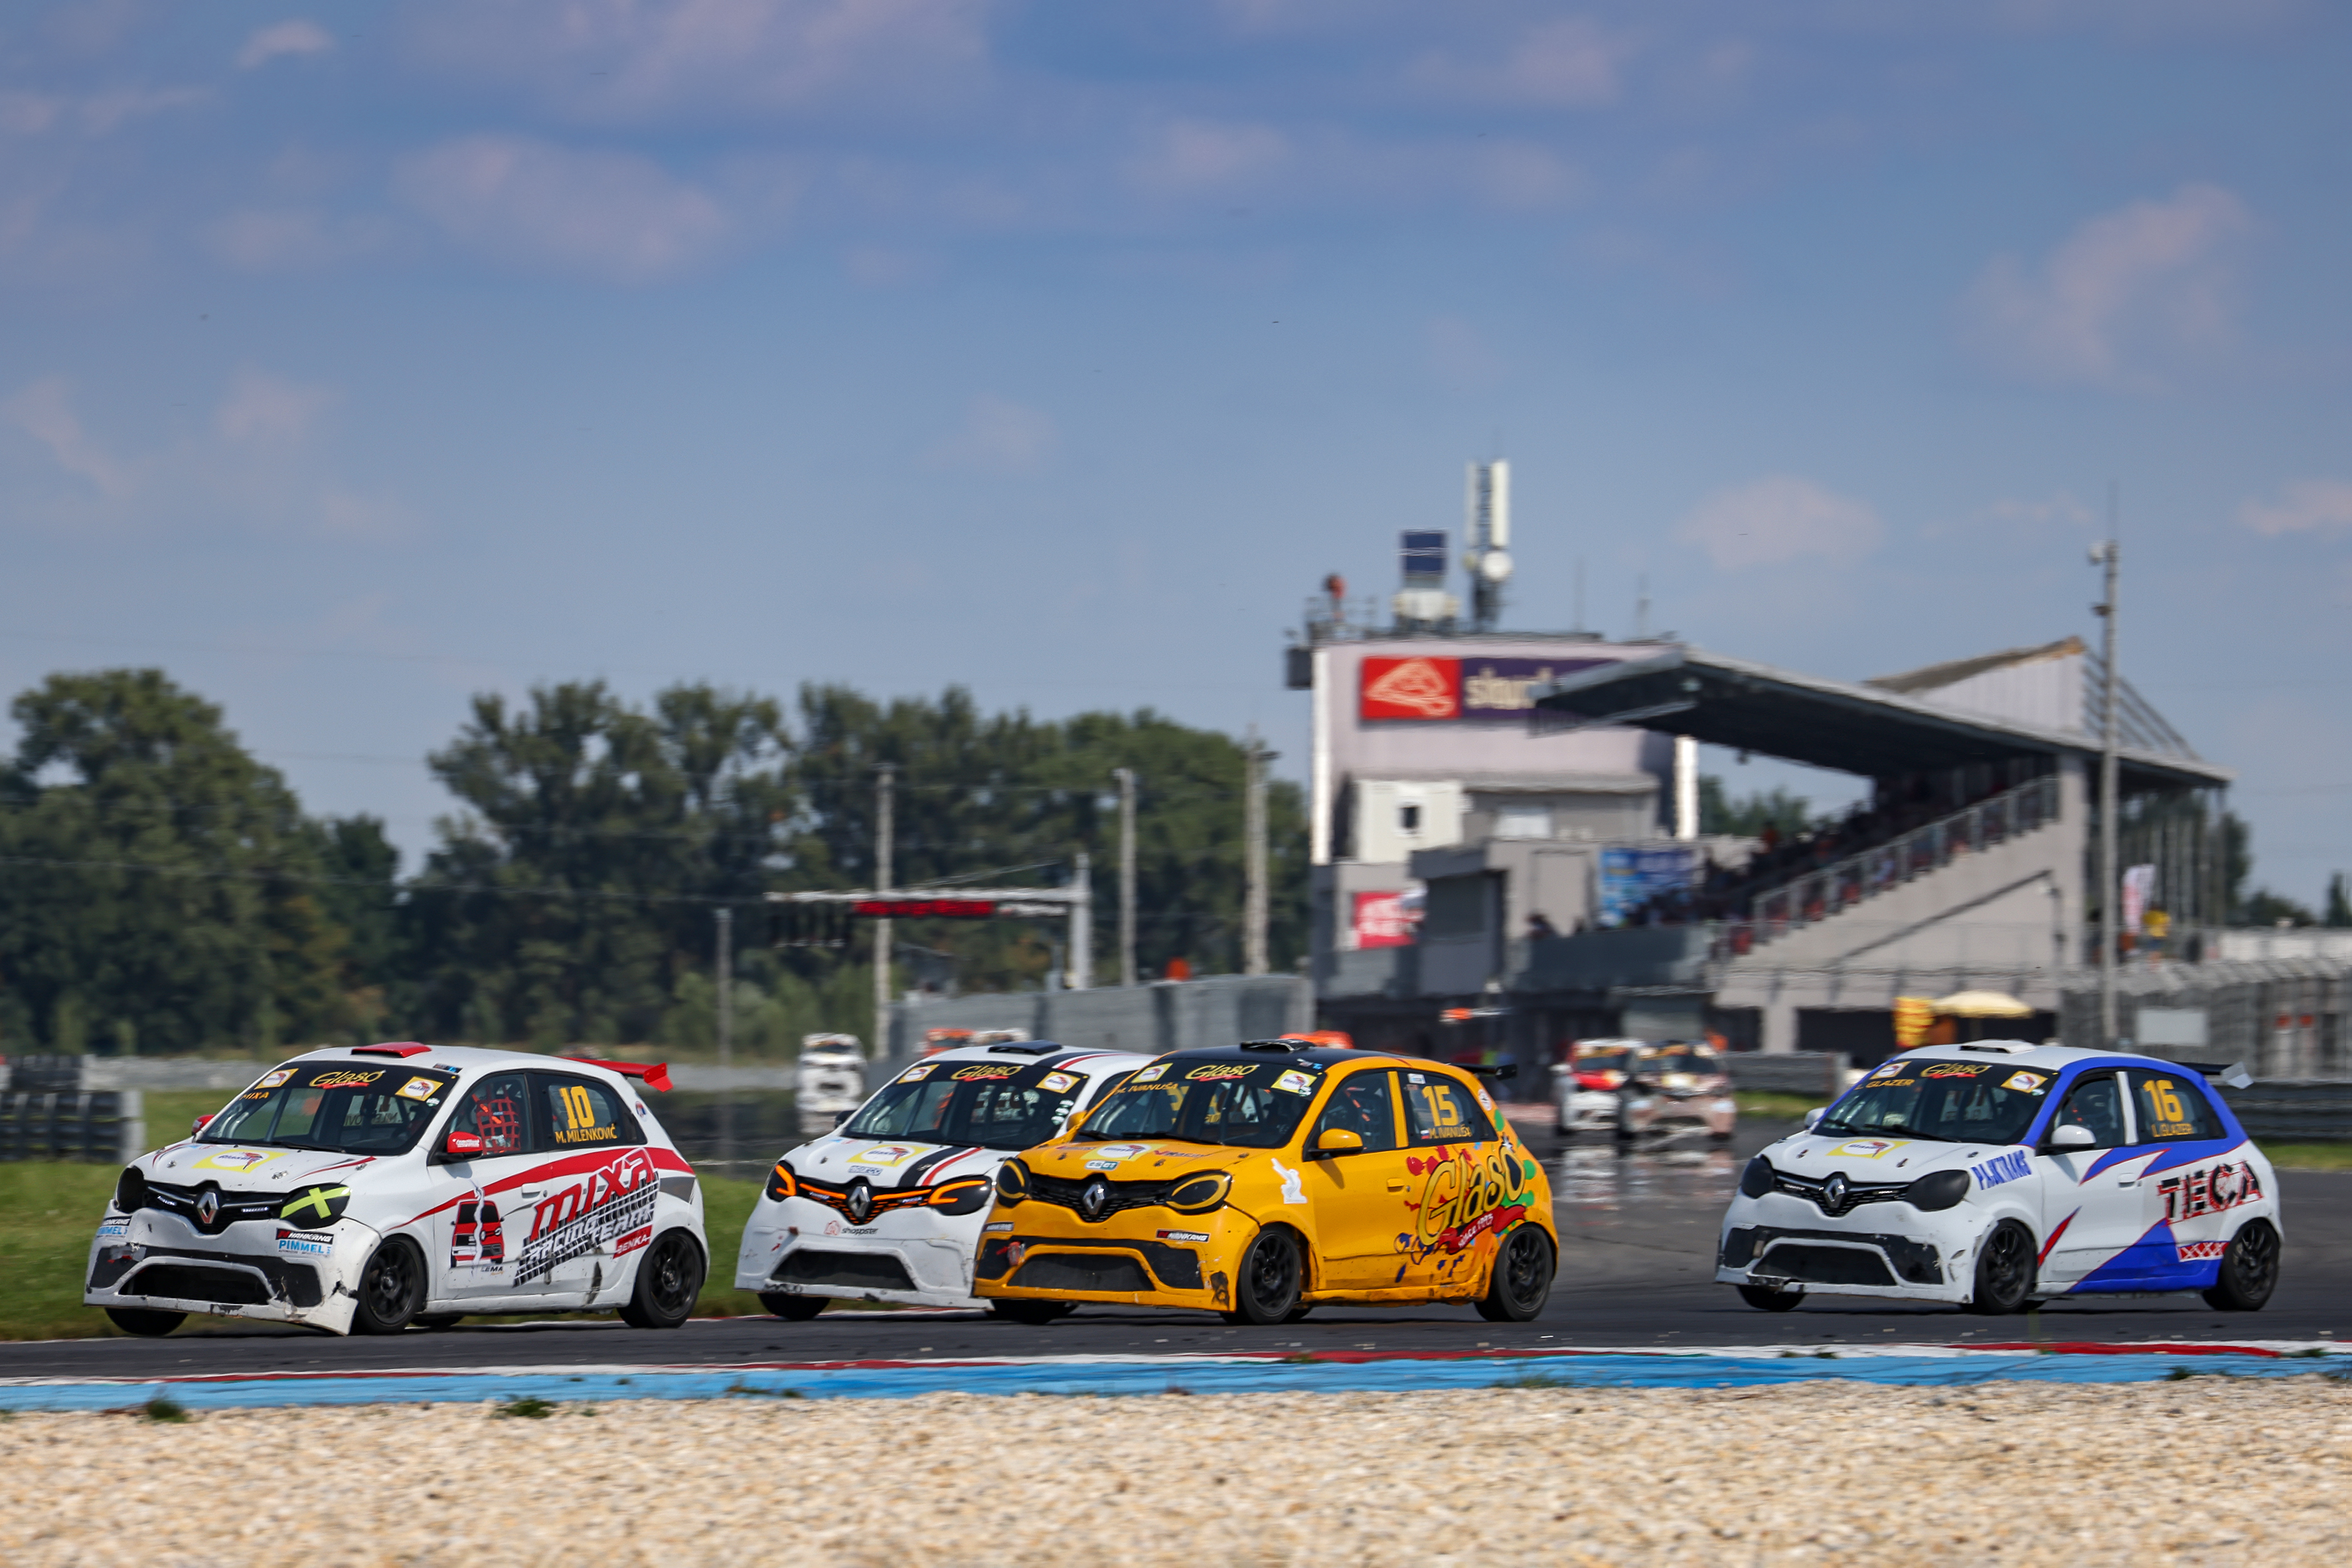 Glazer and Lantos won in Slovakian races of Twingo Cup